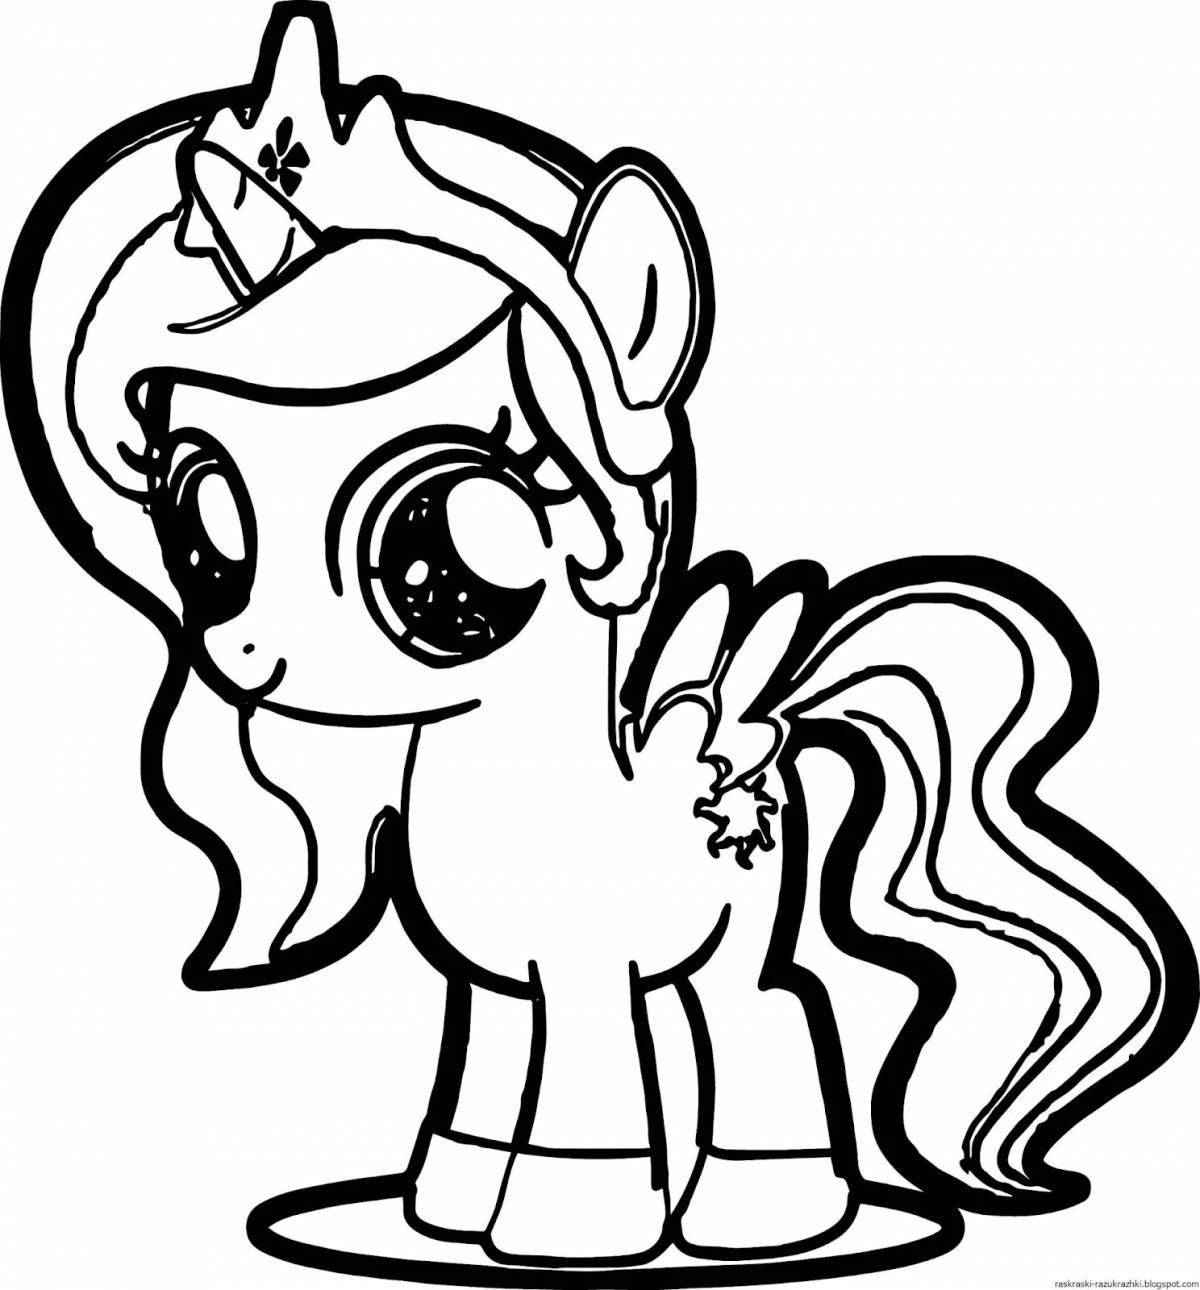 Glitter pony print coloring page